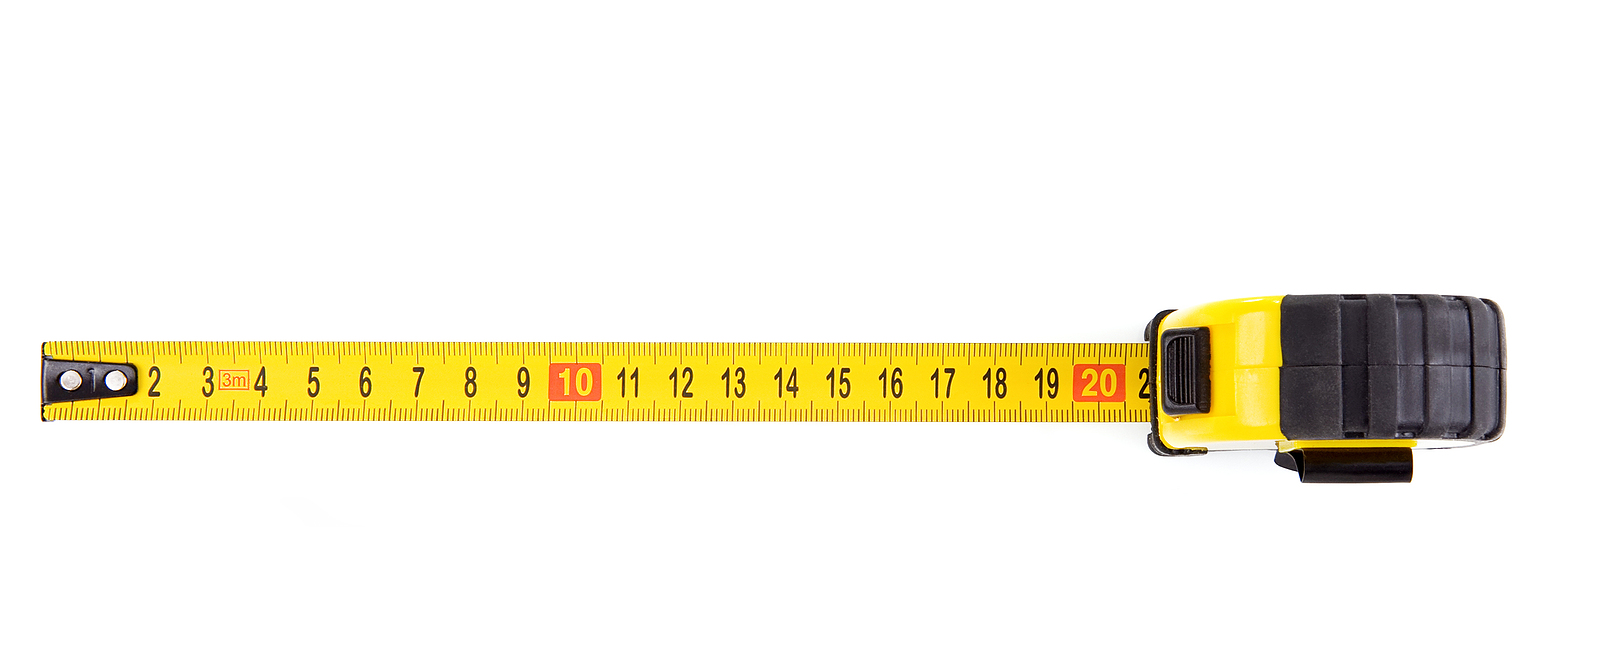 How to read a tape measure: for project success